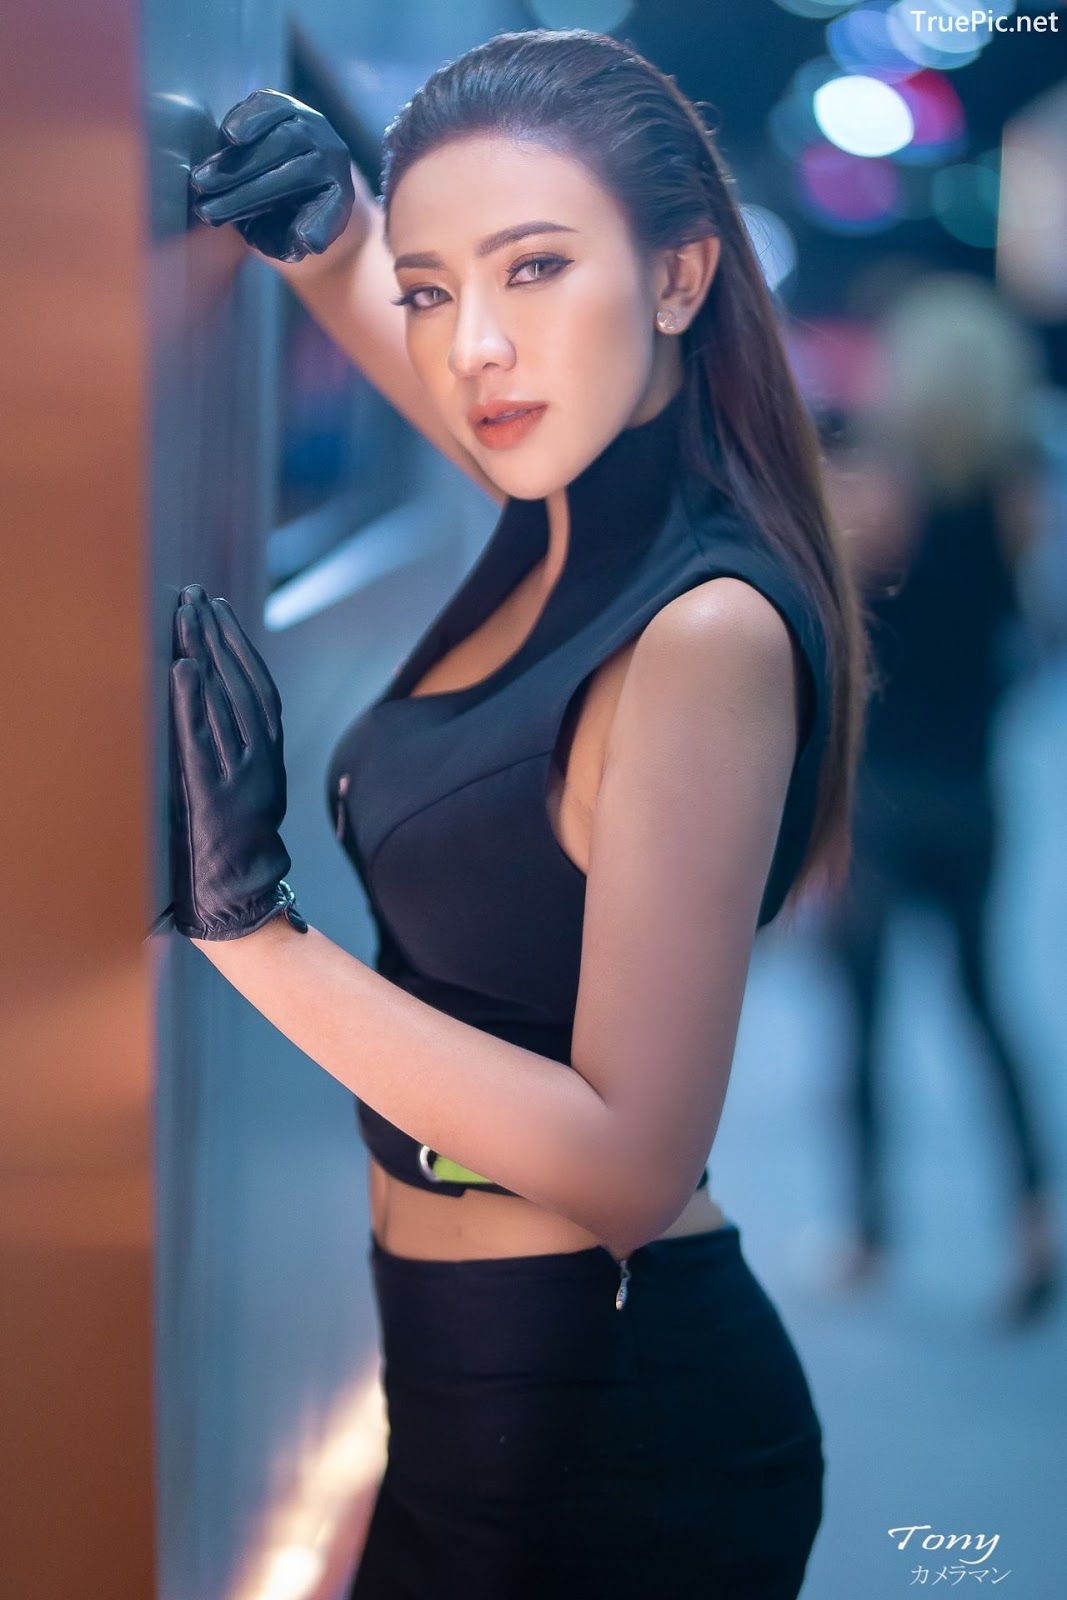 Image-Thailand-Hot-Model-Thai-Racing-Girl-At-Motor-Expo-2019-TruePic.net- Picture-49